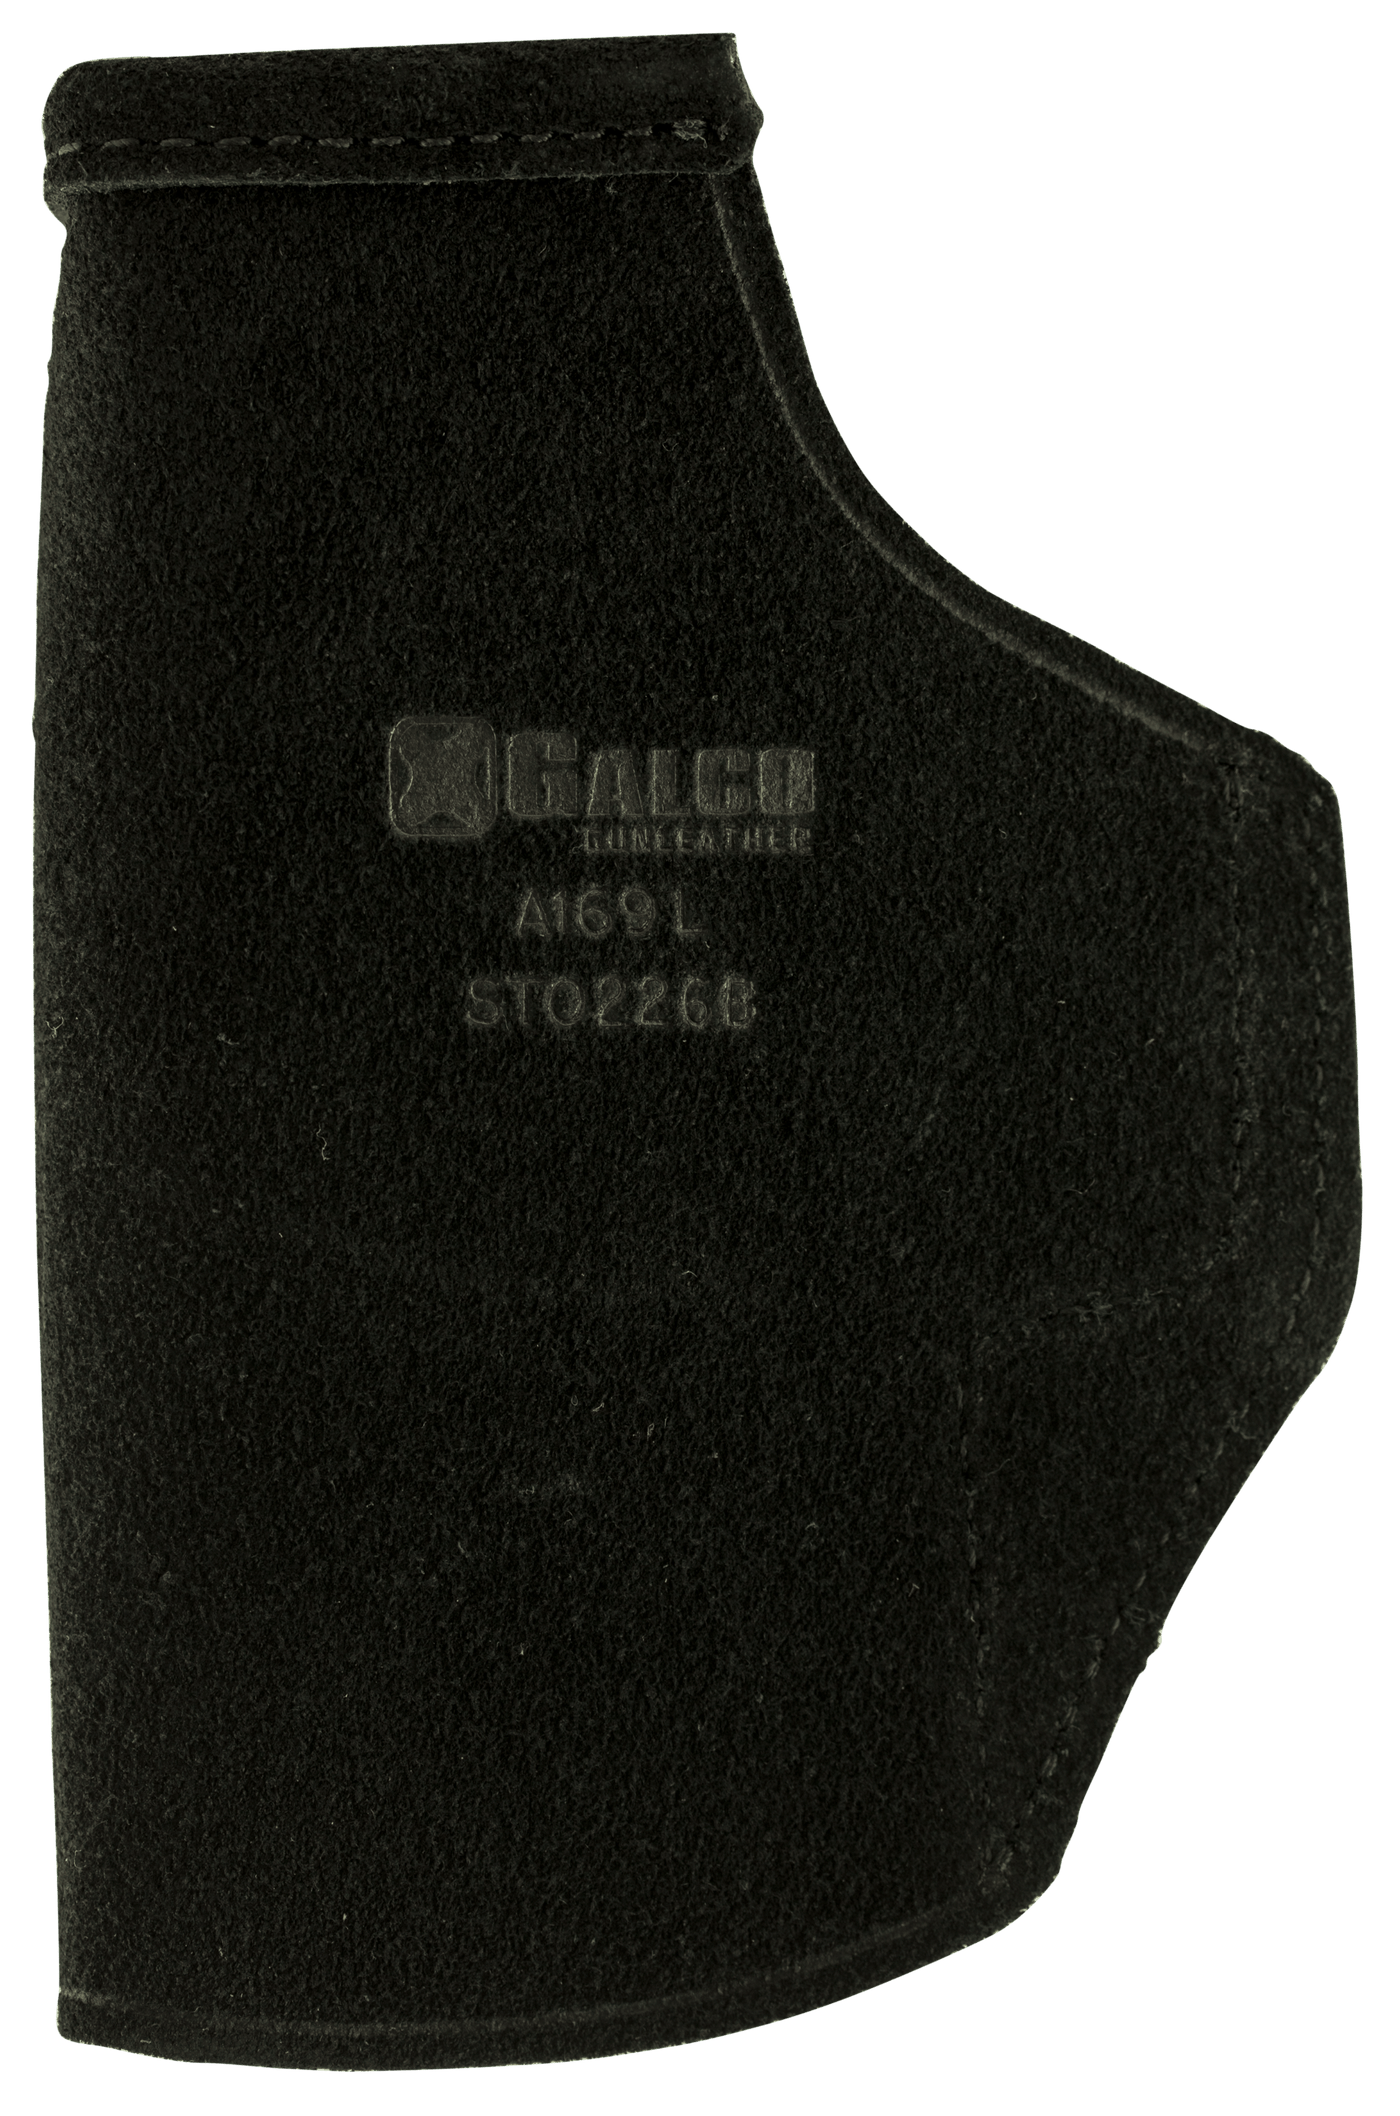 Galco Galco Stow-n-go For Glk 19/23 Lh Blk Holsters